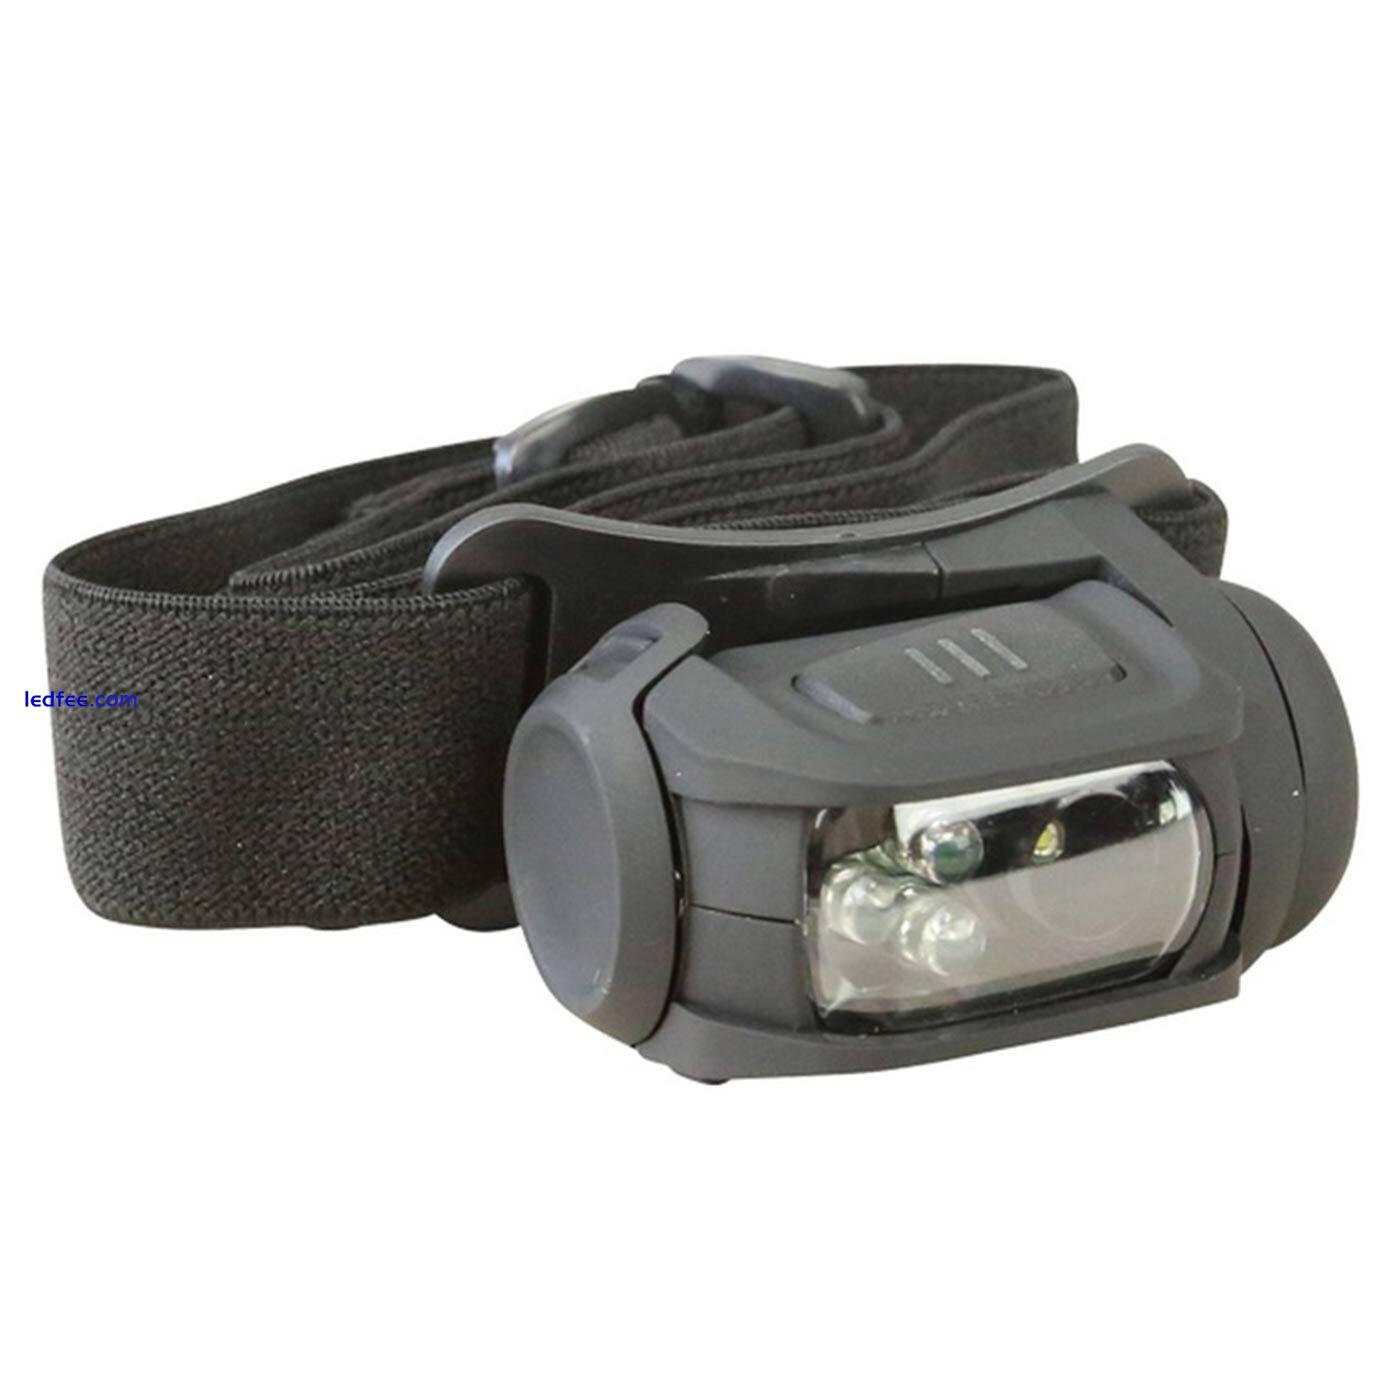 Predator II LED Head Torch White Red Light Tactical Military Army Cadet Headlamp 4 